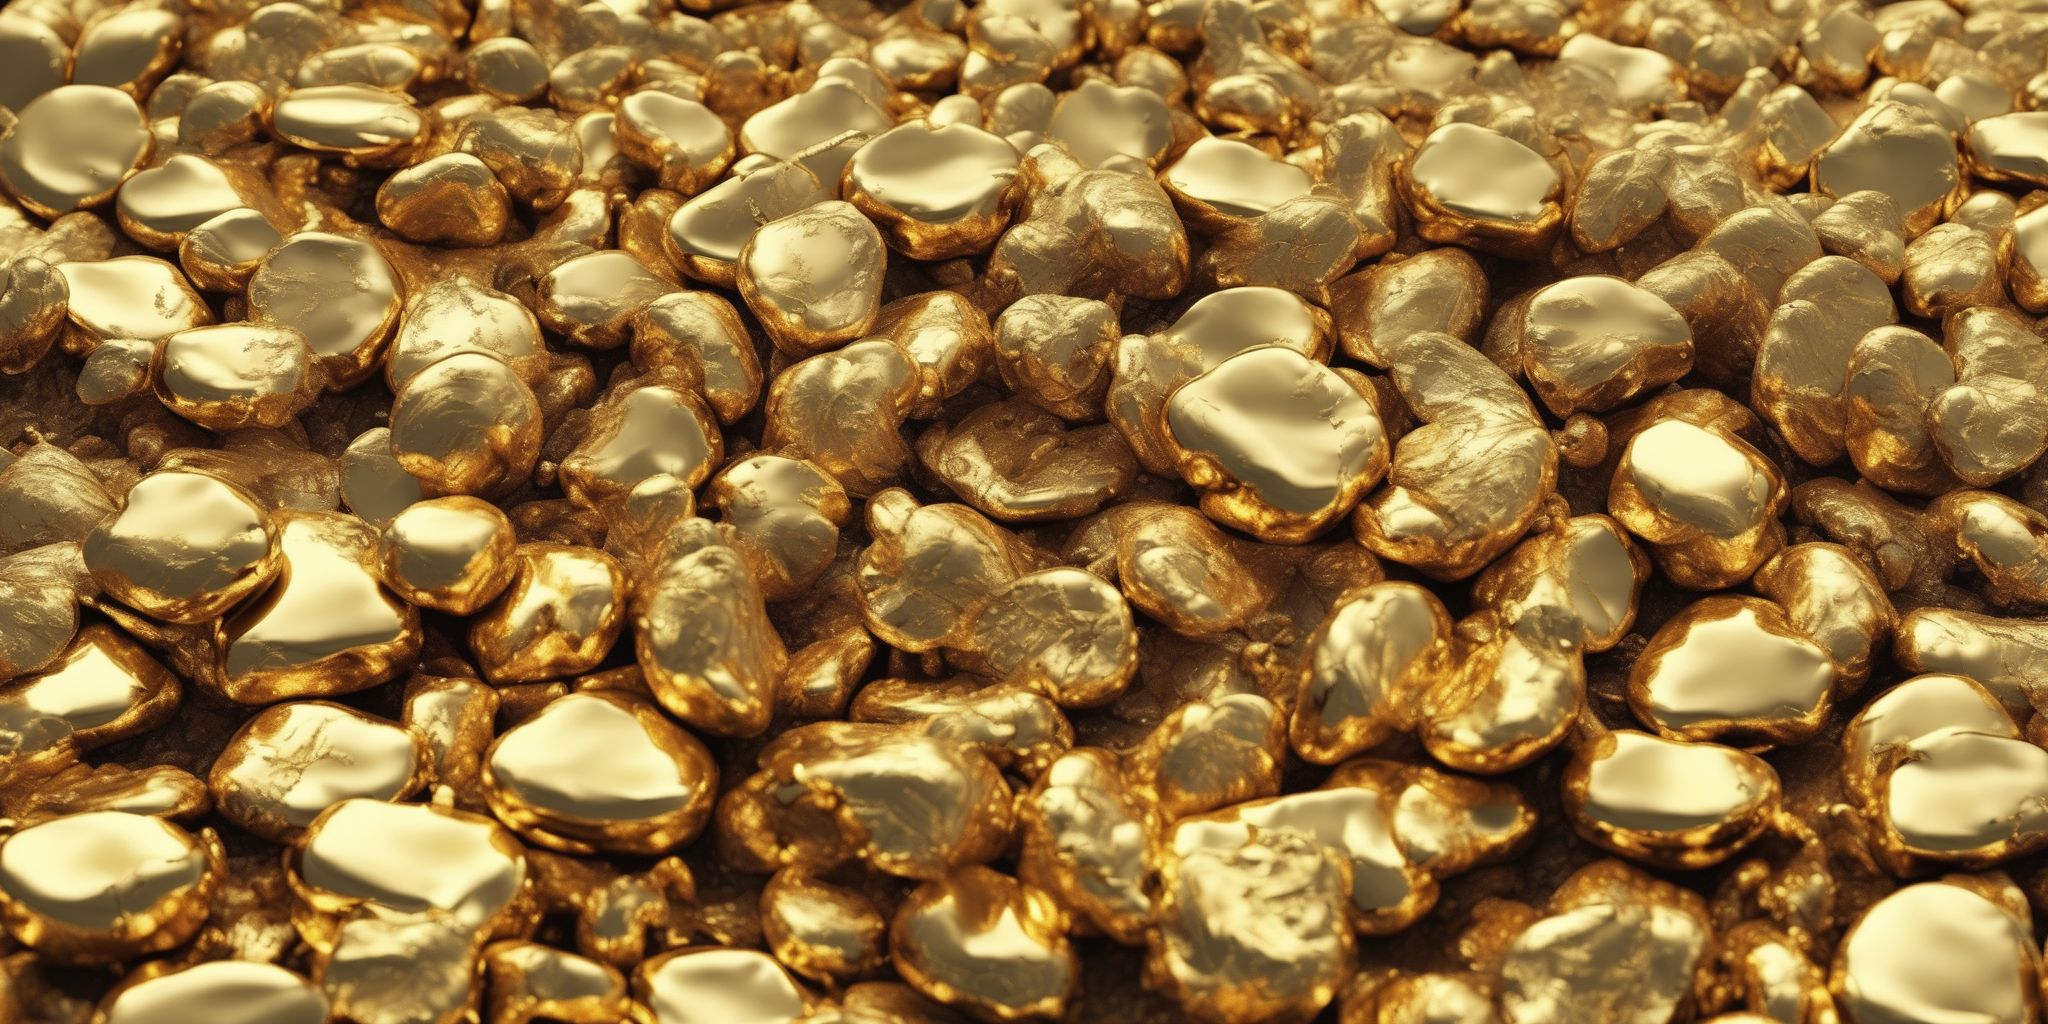 Gold rush  in realistic, photographic style